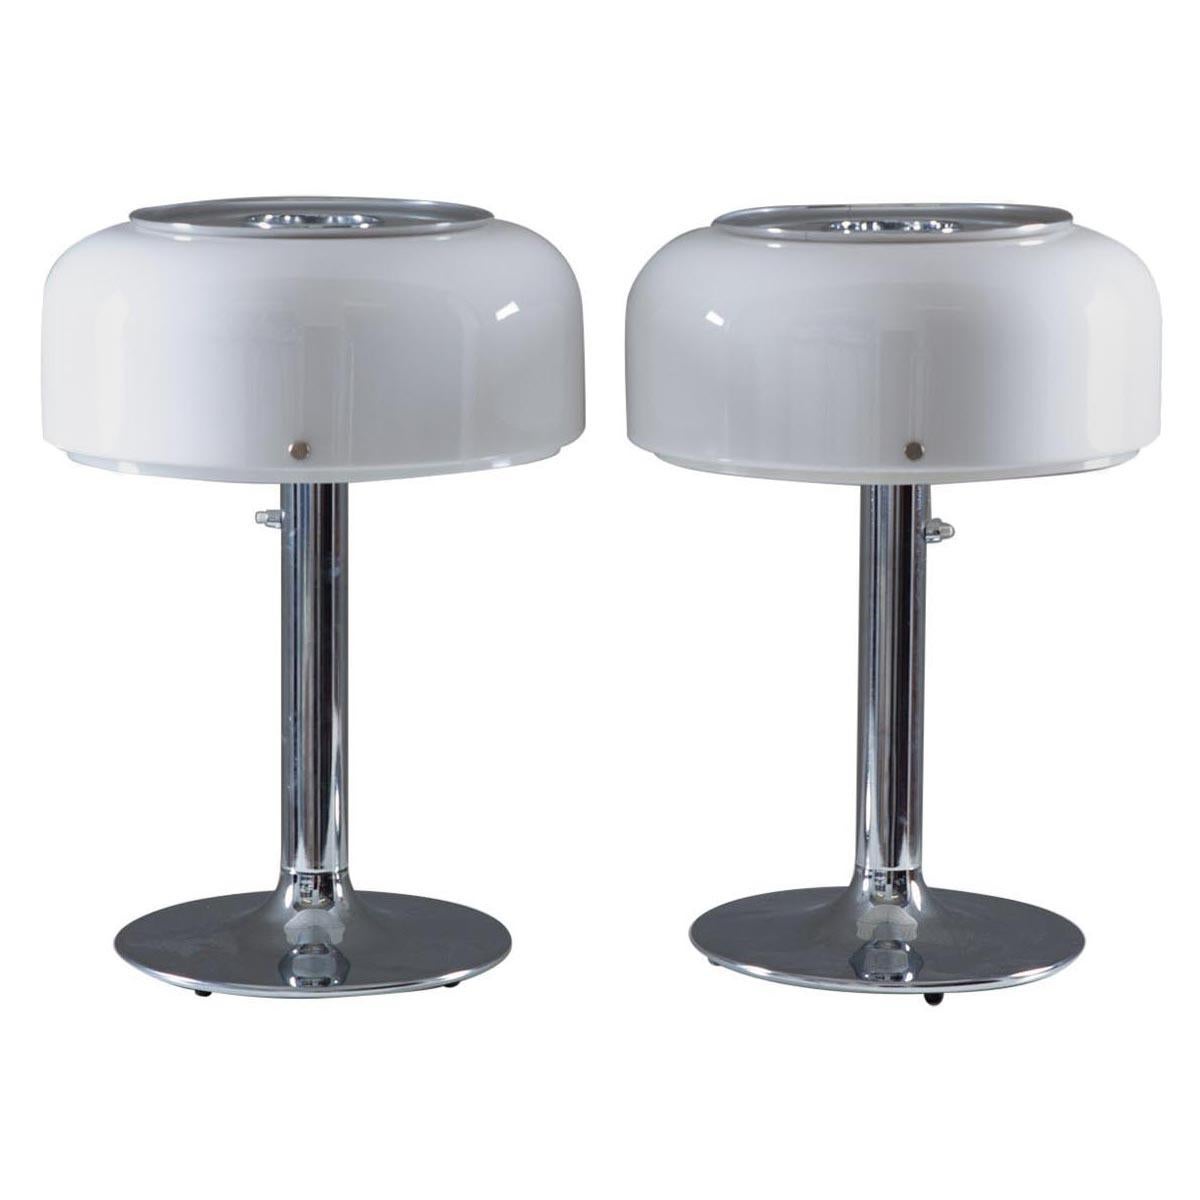 Pair of "Knubbling" Table Lamps in Chrome and Acrylic by Ateljé Lyktan